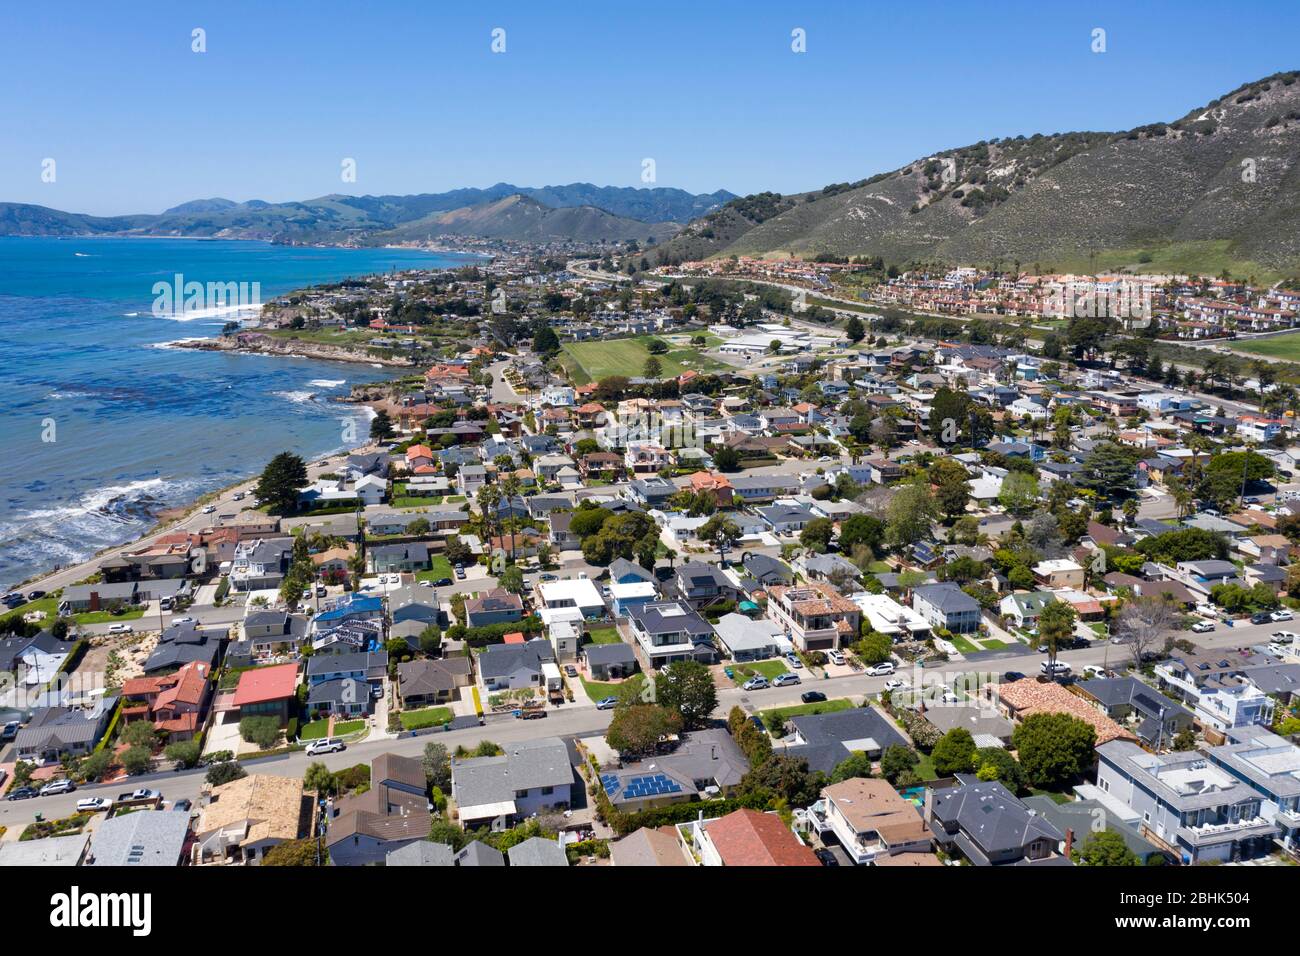 Aerial view above rugged central California coastline in the city of Pismo Beach Stock Photo